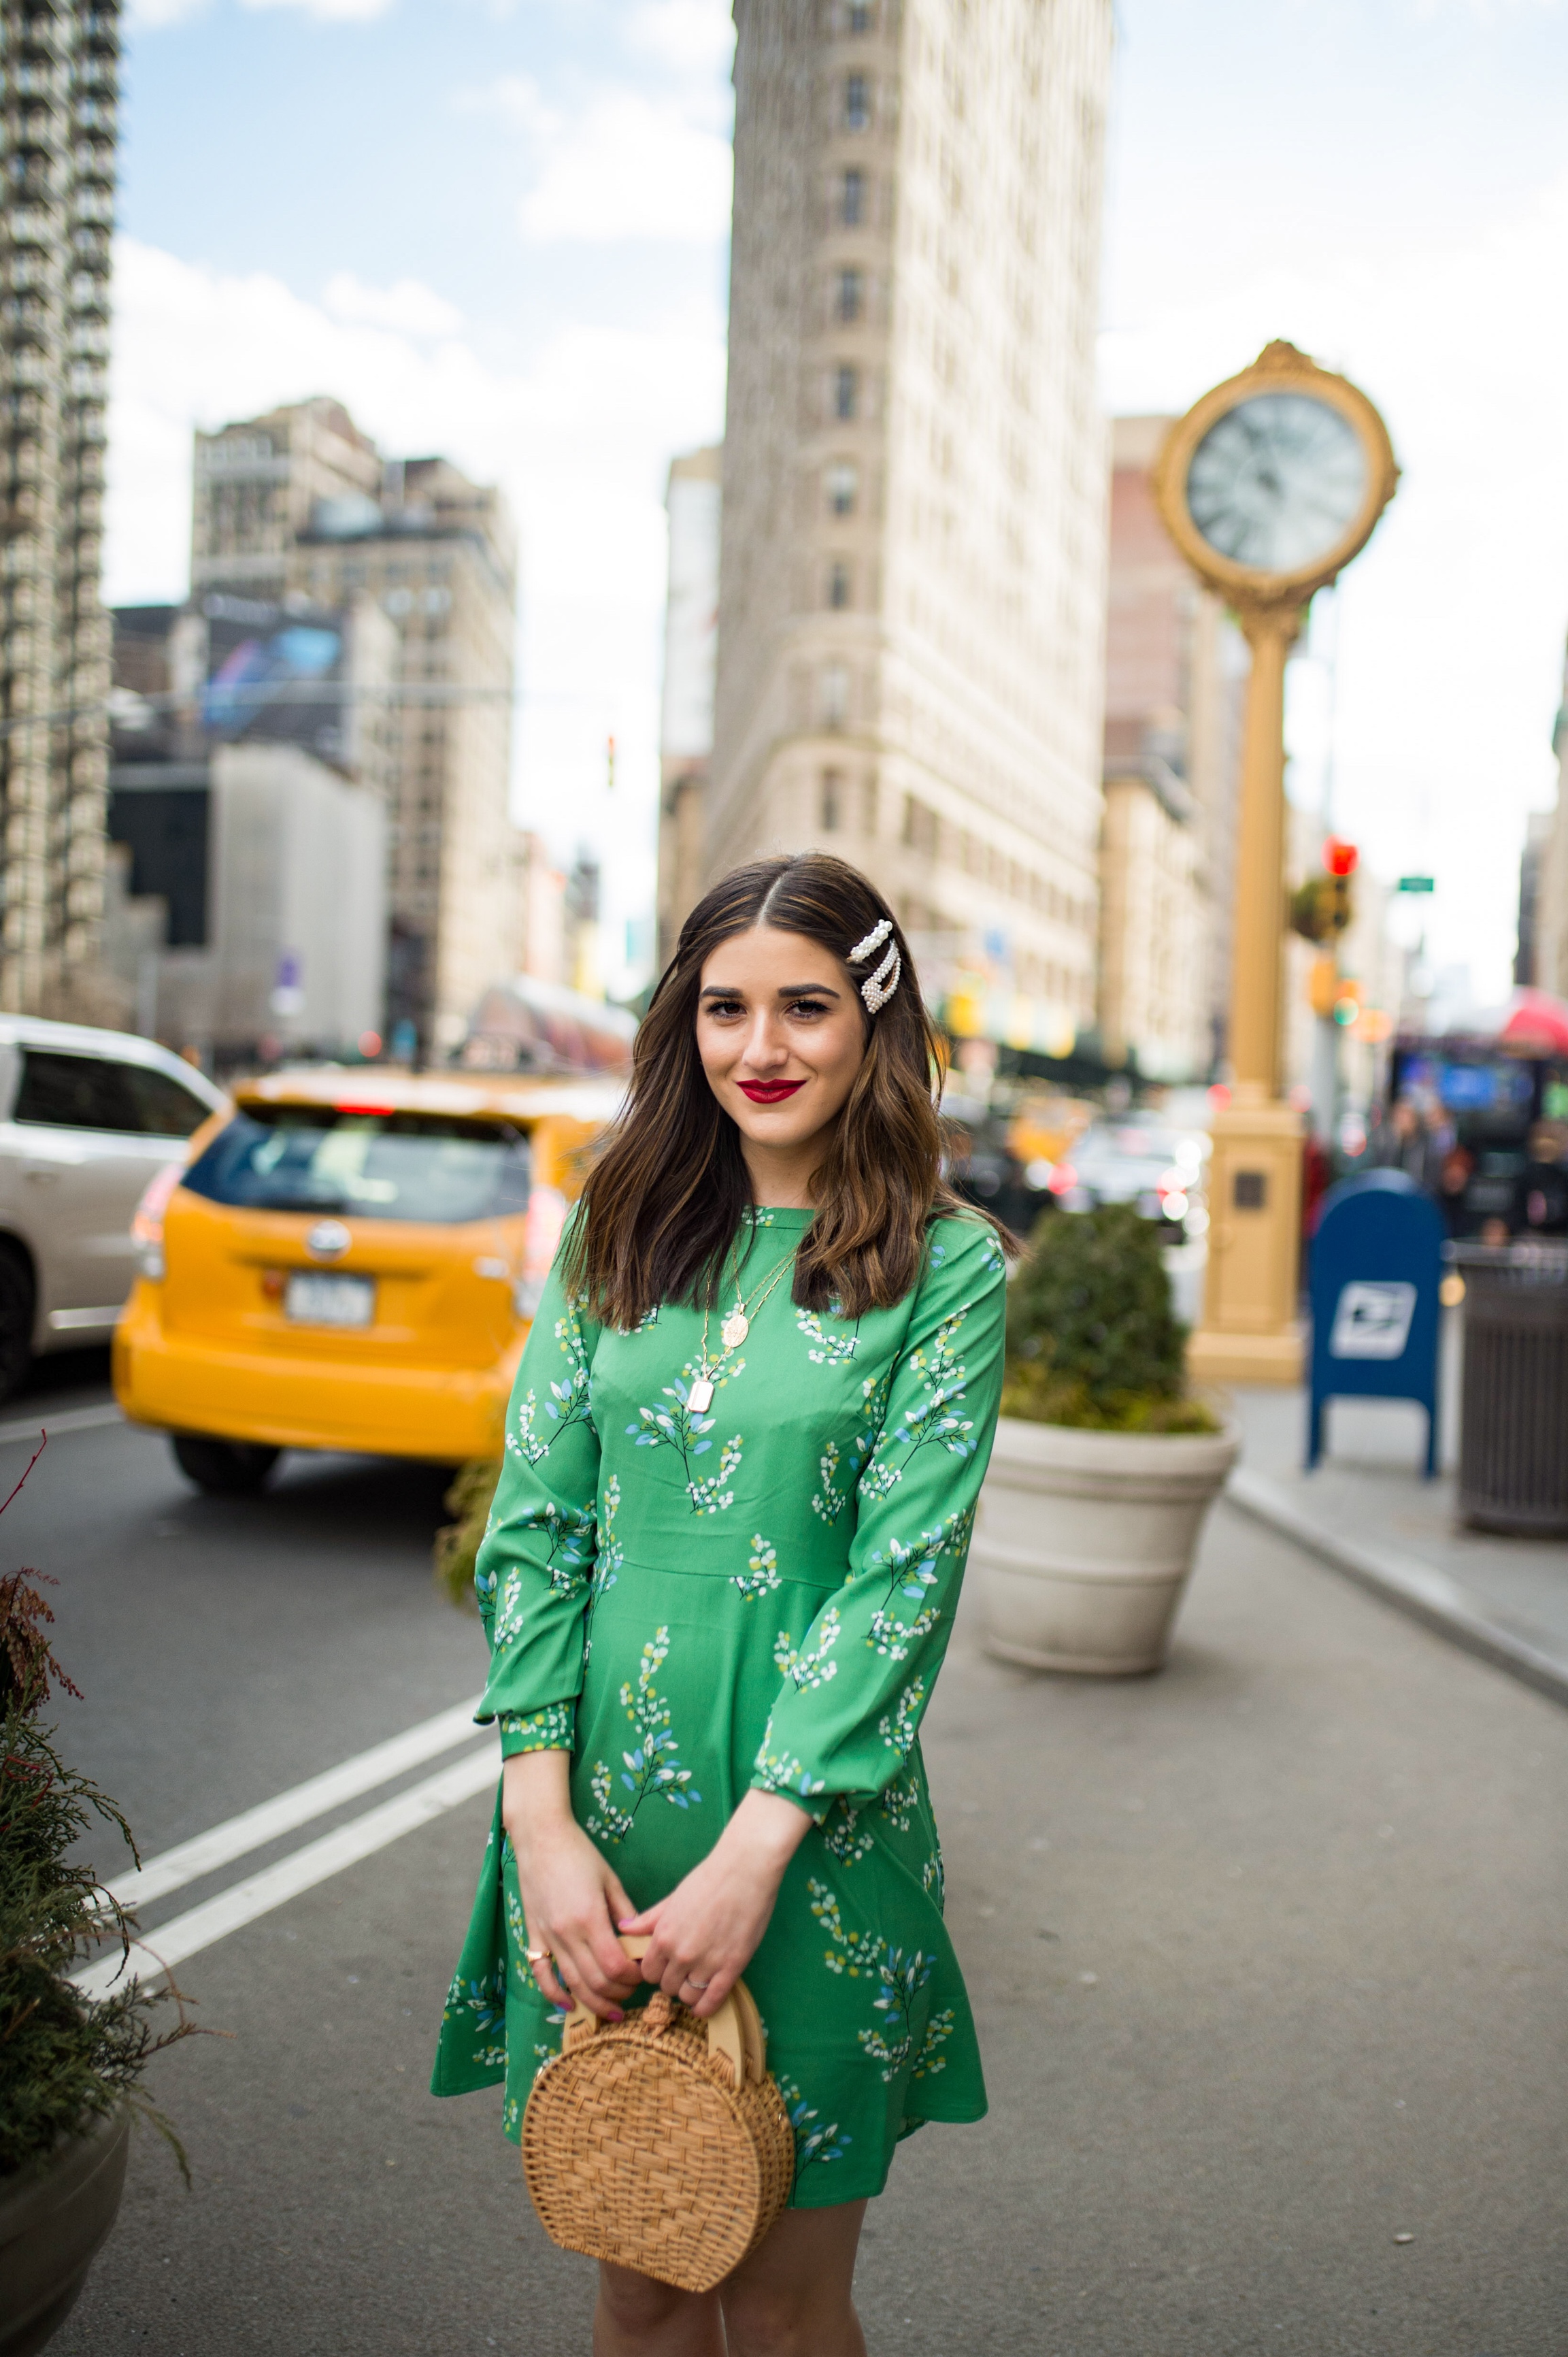 Styling Green For Spring LOFT Esther Santer Fashion Blog NYC Street Style Blogger Outfit OOTD Trendy Shopping White Heels Basket Circle Bag Florals Hair Accessories Pearl Clips Flatiron Photoshoot  Inspo Inspiration Petite Dress Inclusive Sizing Bag.jpg